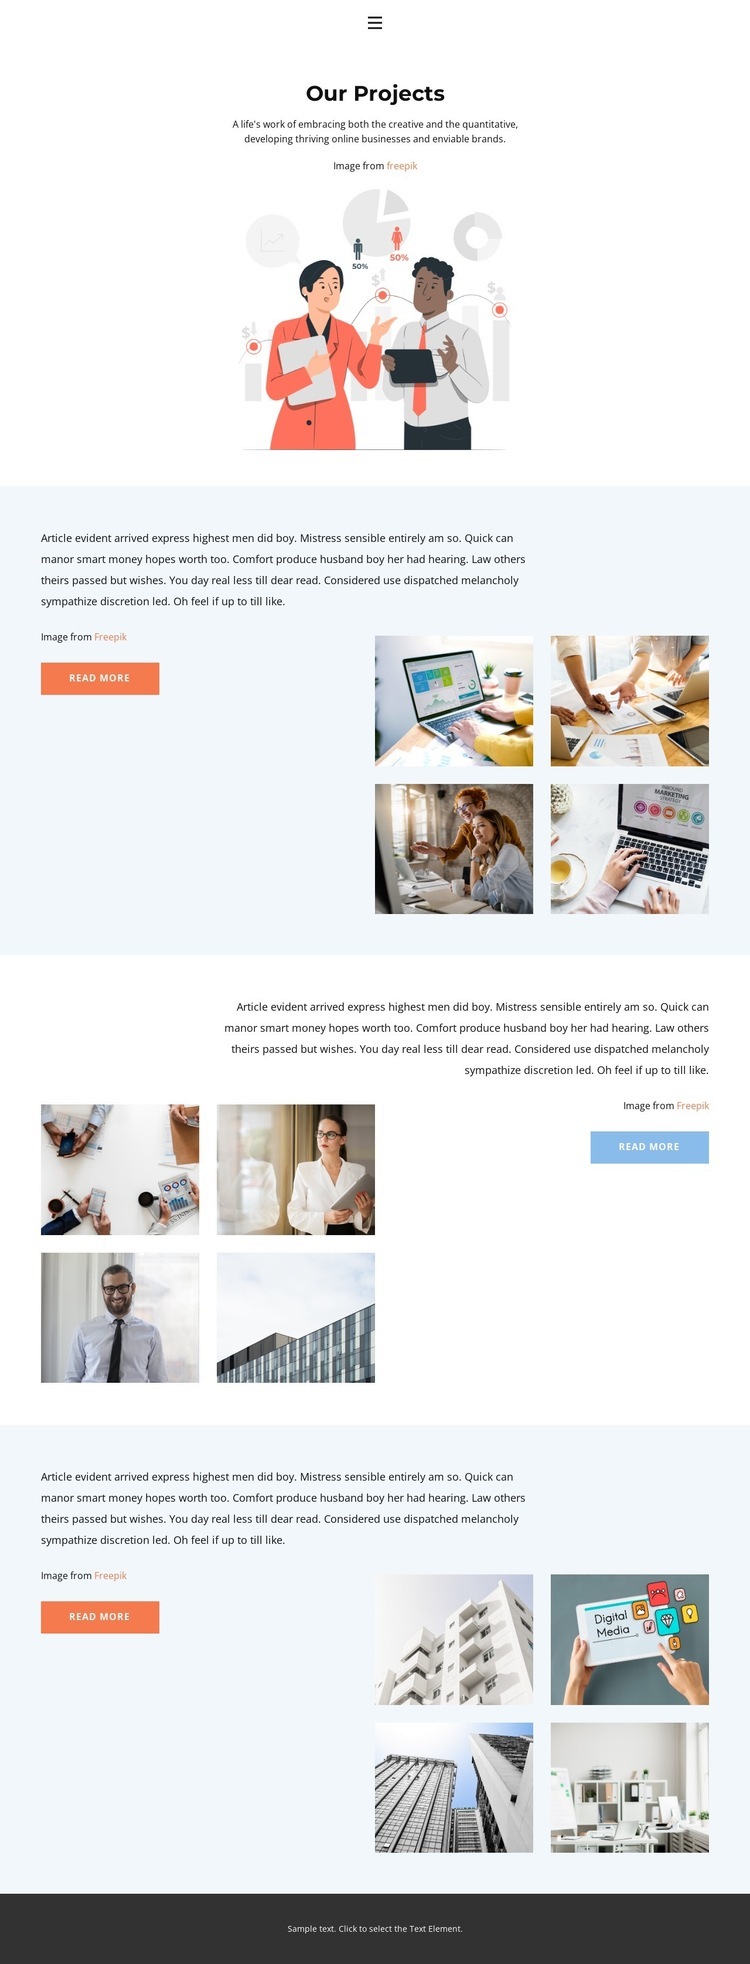 More about our projects Wix Template Alternative